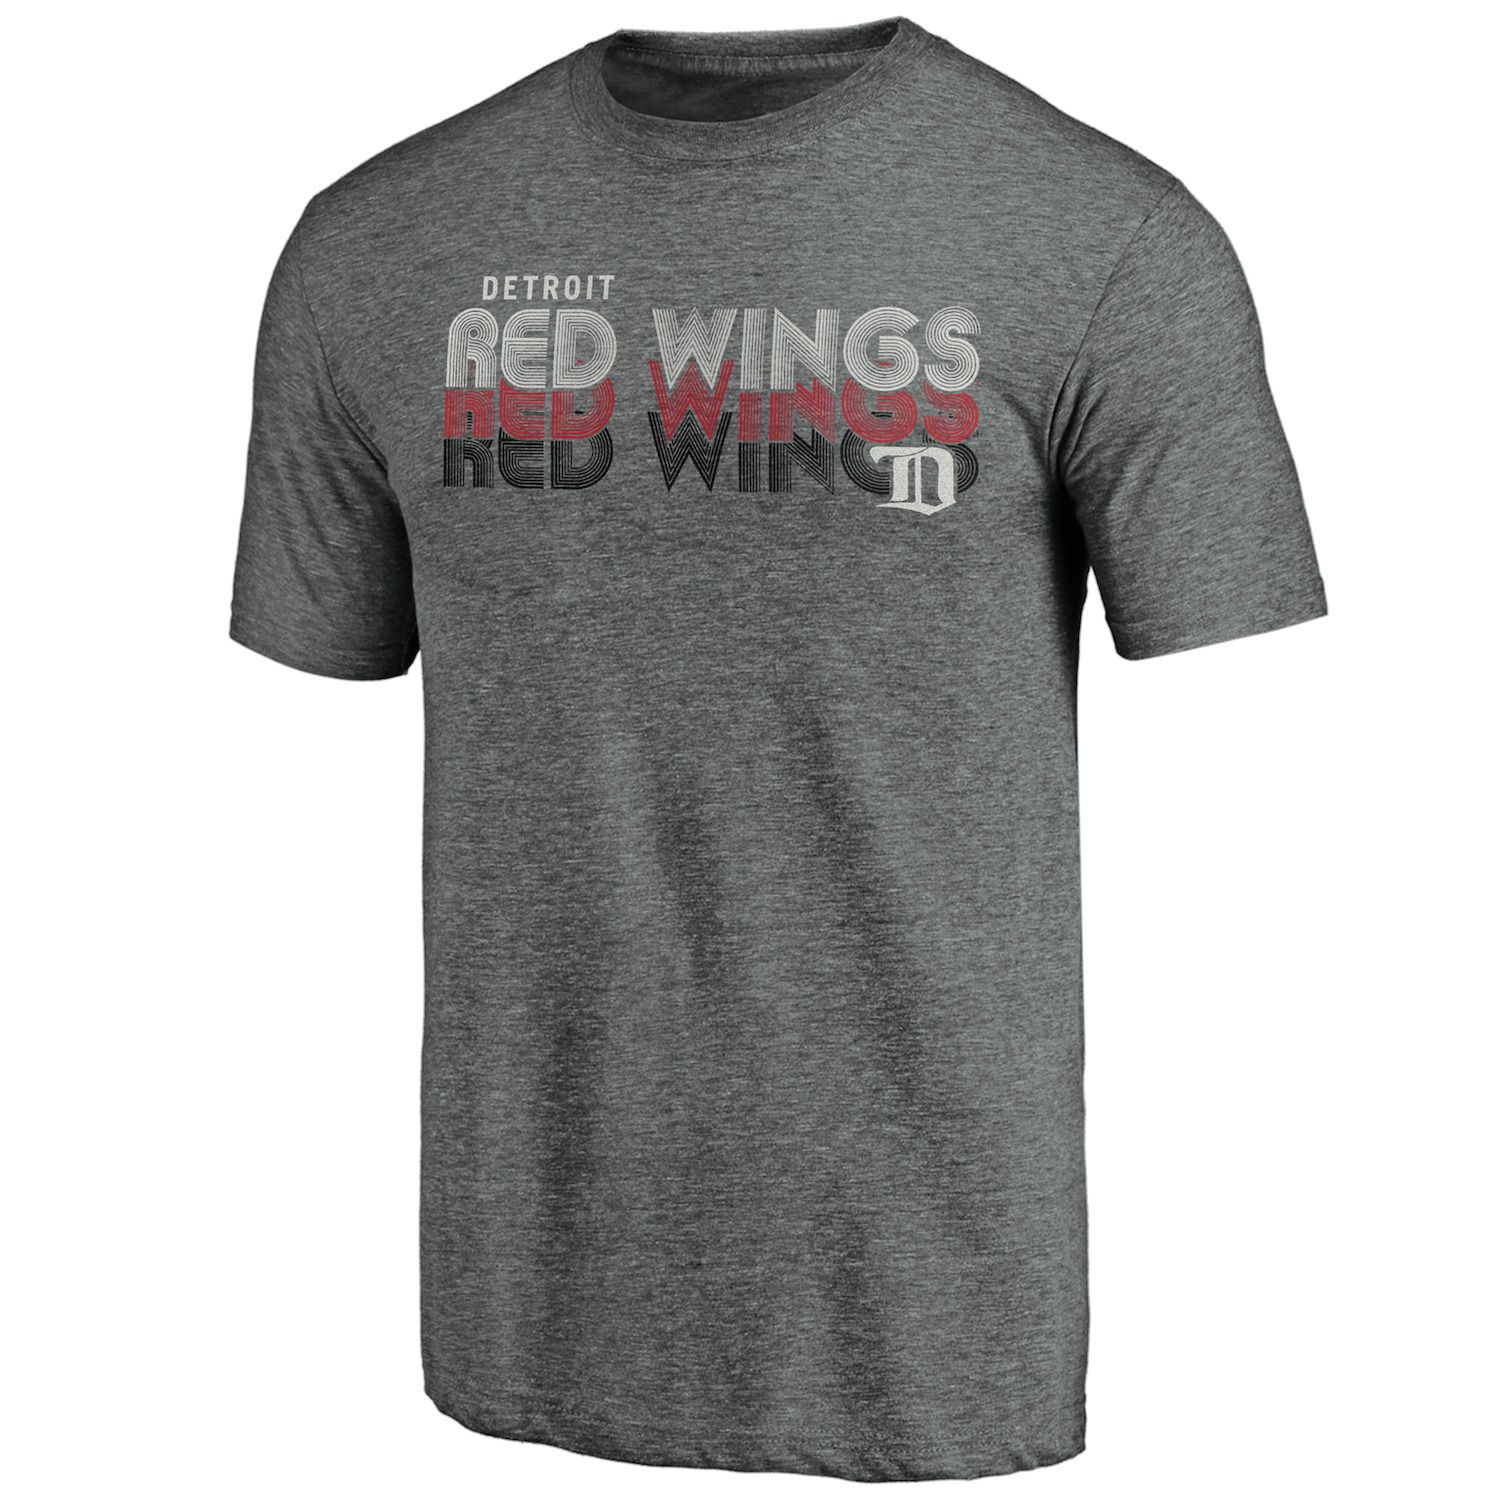 red wings hat trick